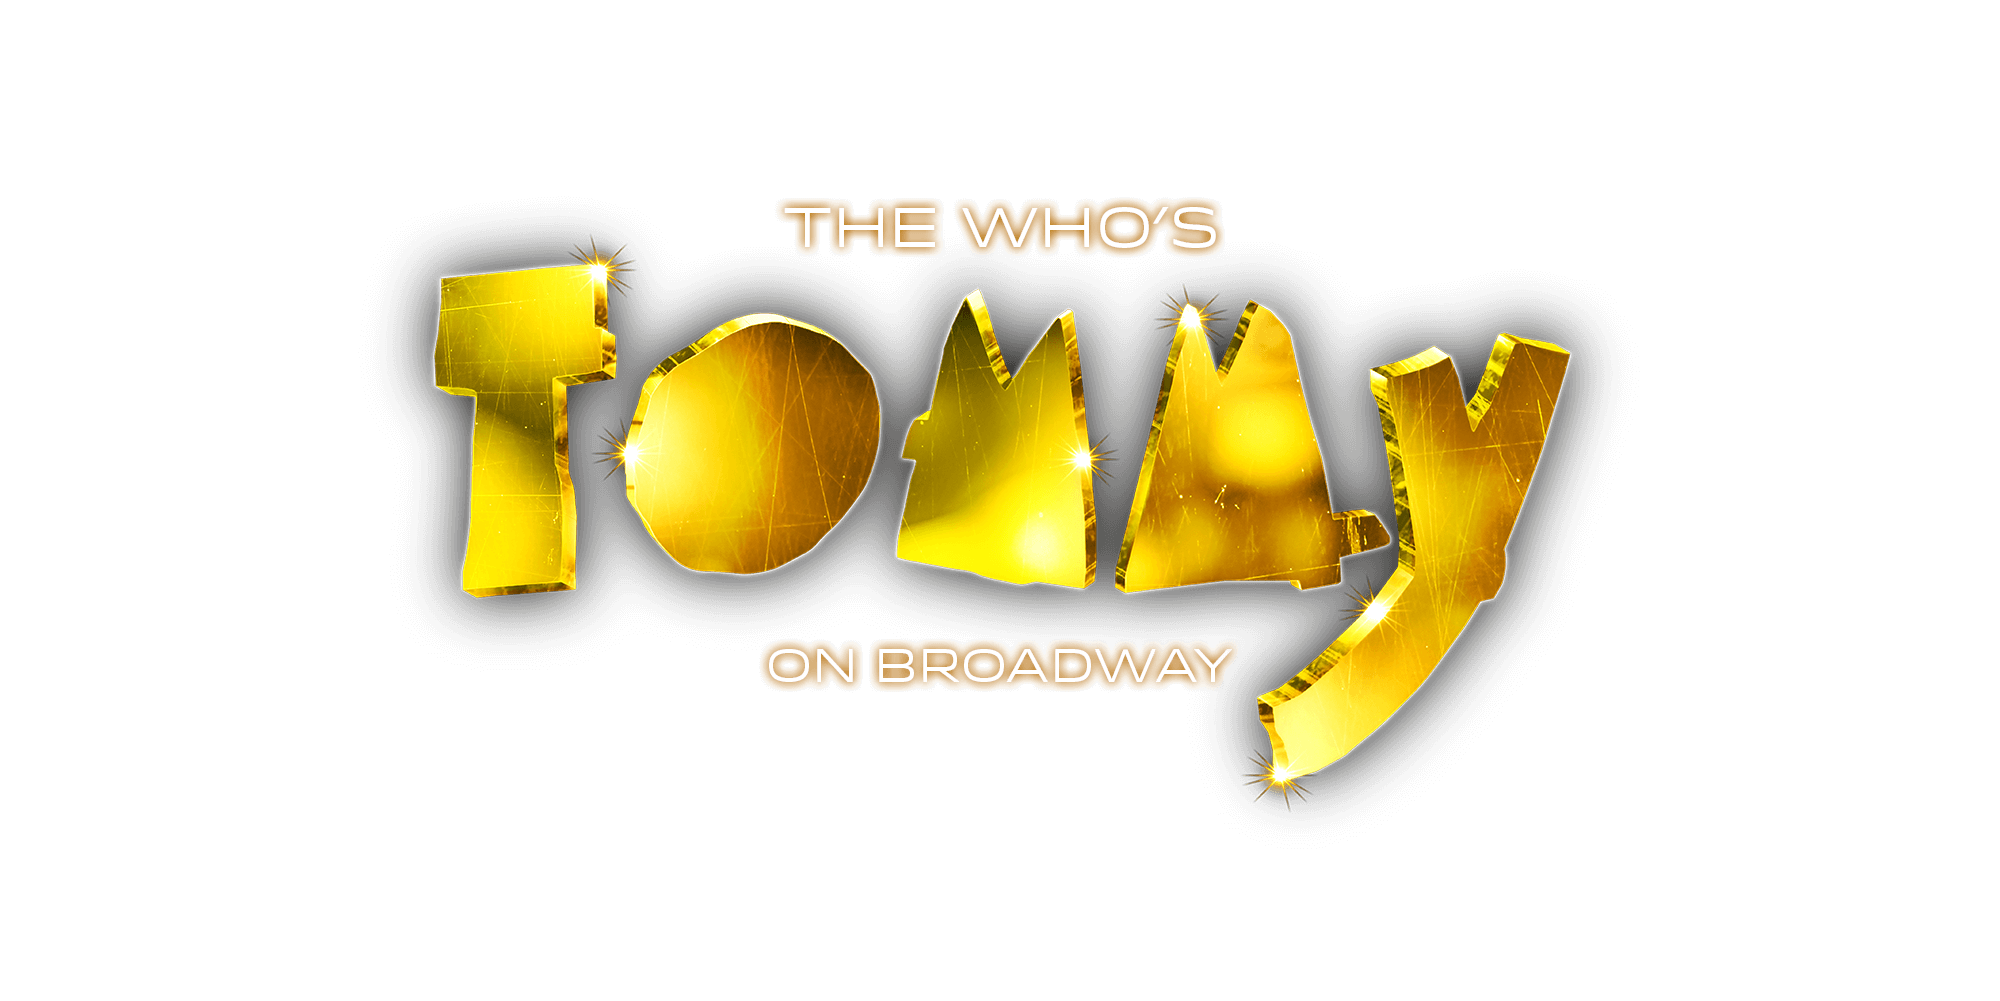 THE WHO'S TOMMY on Broadway